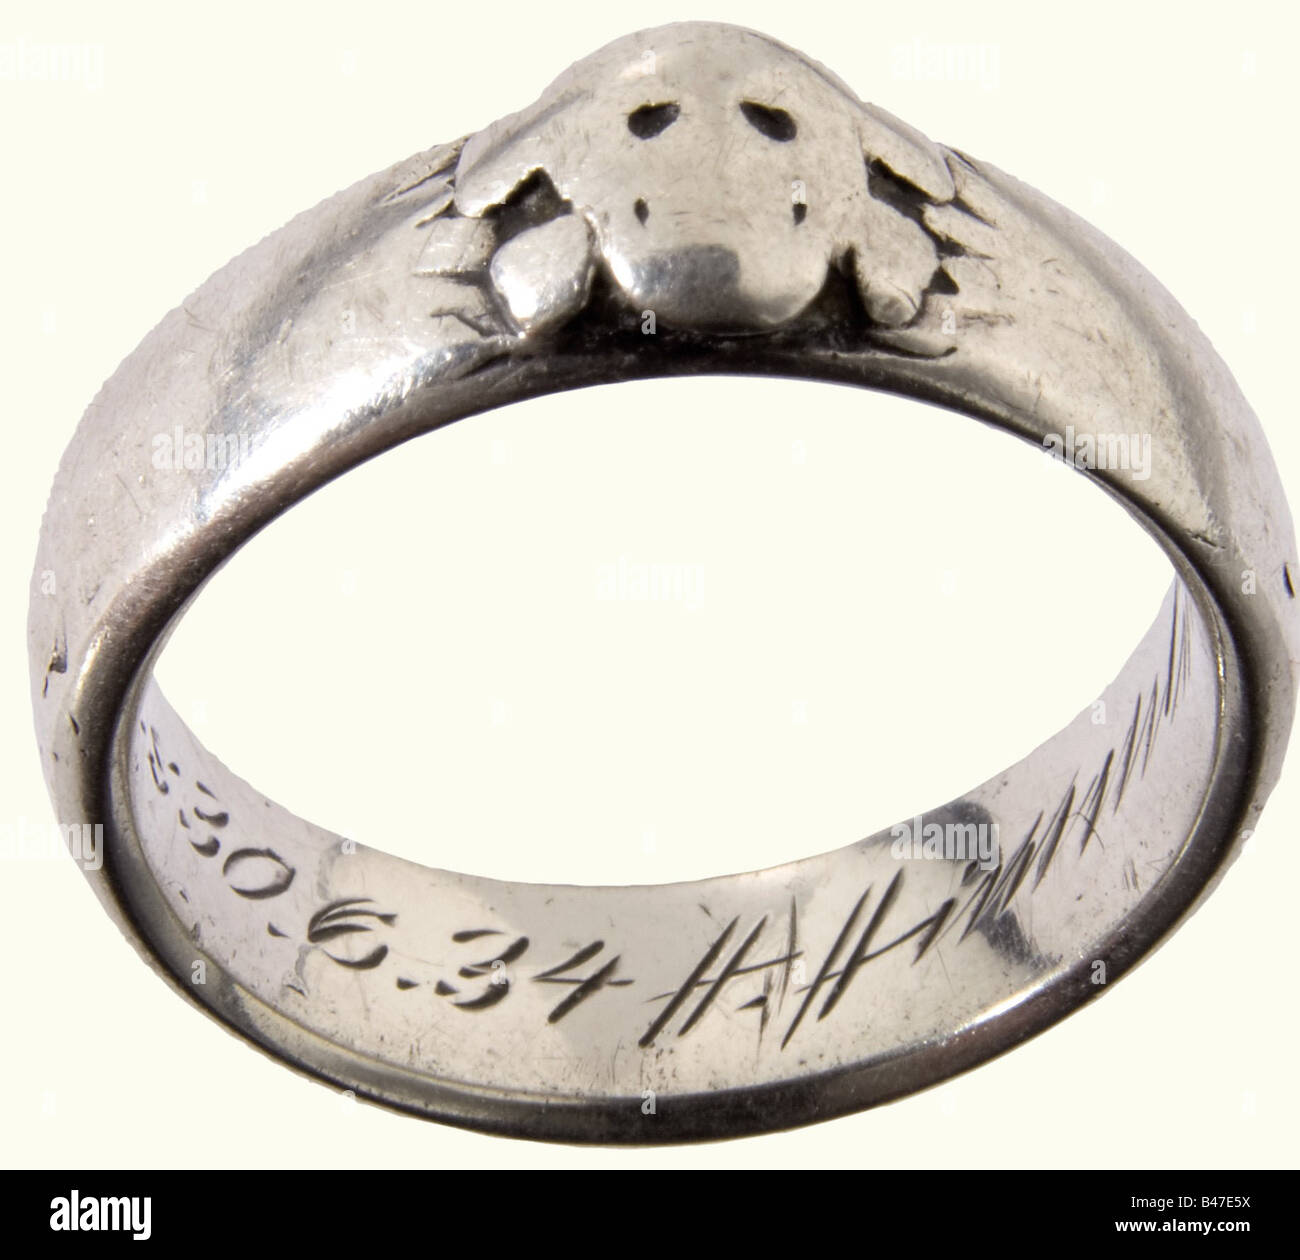 SS-Obersturmbannführer Emil Büchs - SS Death's Head Ring, and three documents. The ring is worn smooth, with identifiable superimposed Death's Head and the engraved dedicatory inscription 'S.lb. Büchs 30.6.34 H. Himmler'. Included are the award documents for the Honour Cross for Front Fighters 1935 to the 'Referenten bei der Reichsführung der SS' ('Consultant to the Reichs SS Leadership') and the War Merit Cross 2nd Class with Swords 1941 with signature in ink of Major General and Wehrmacht Commander in the East Walter Braemer, as well as the transmittal letter, Stock Photo